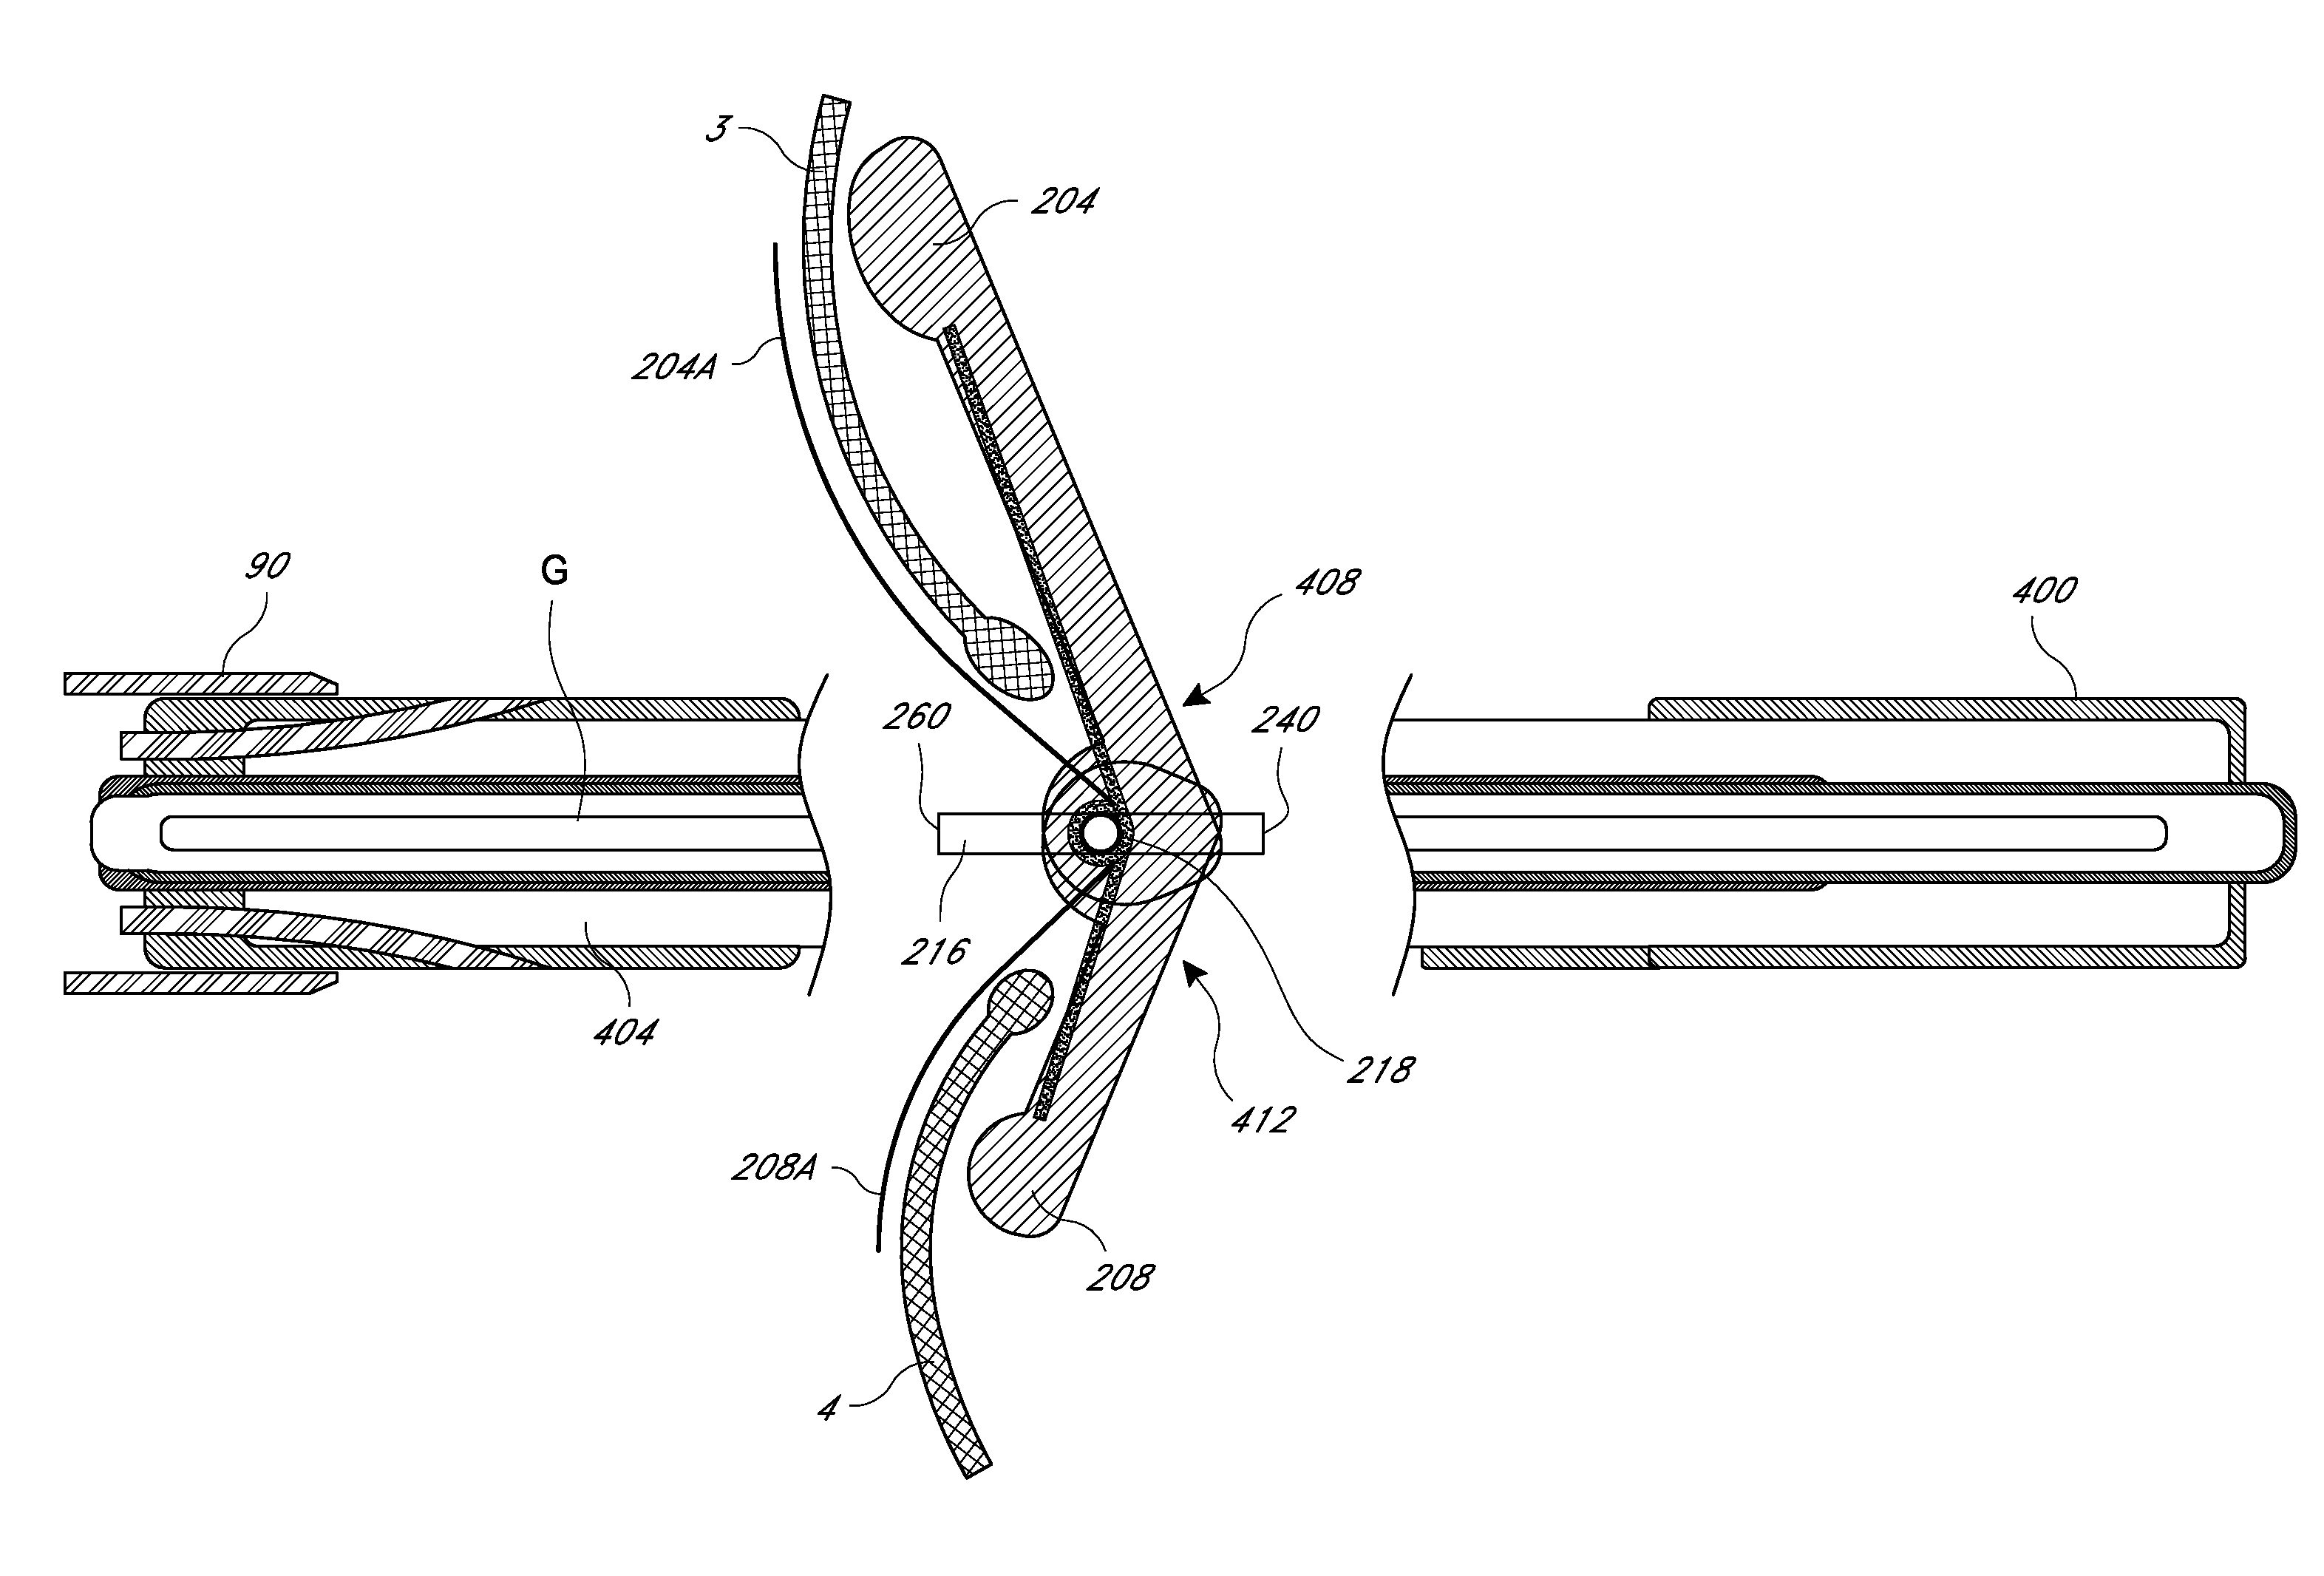 Method and apparatus for percutaneous delivery and deployment of a cardiovascular prosthesis